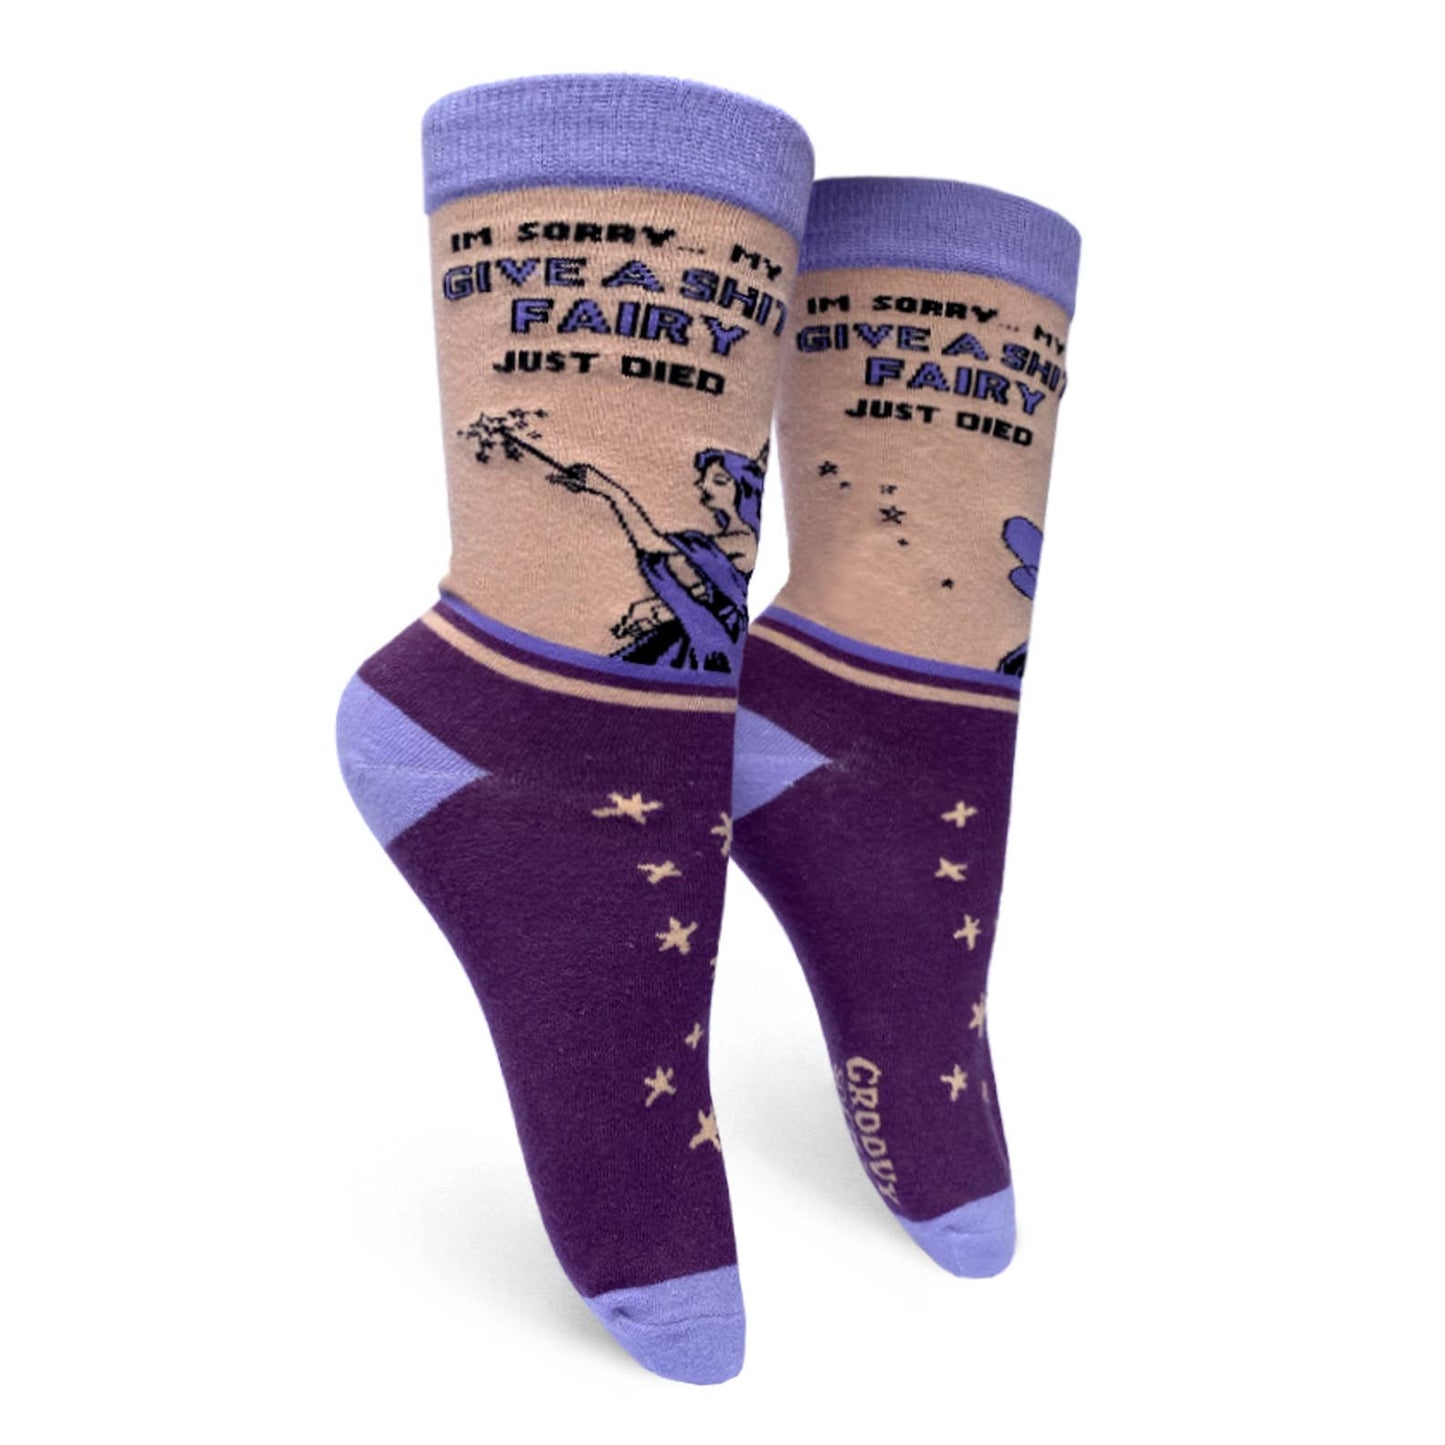 Give a Shit Fairy Womens Crew Socks